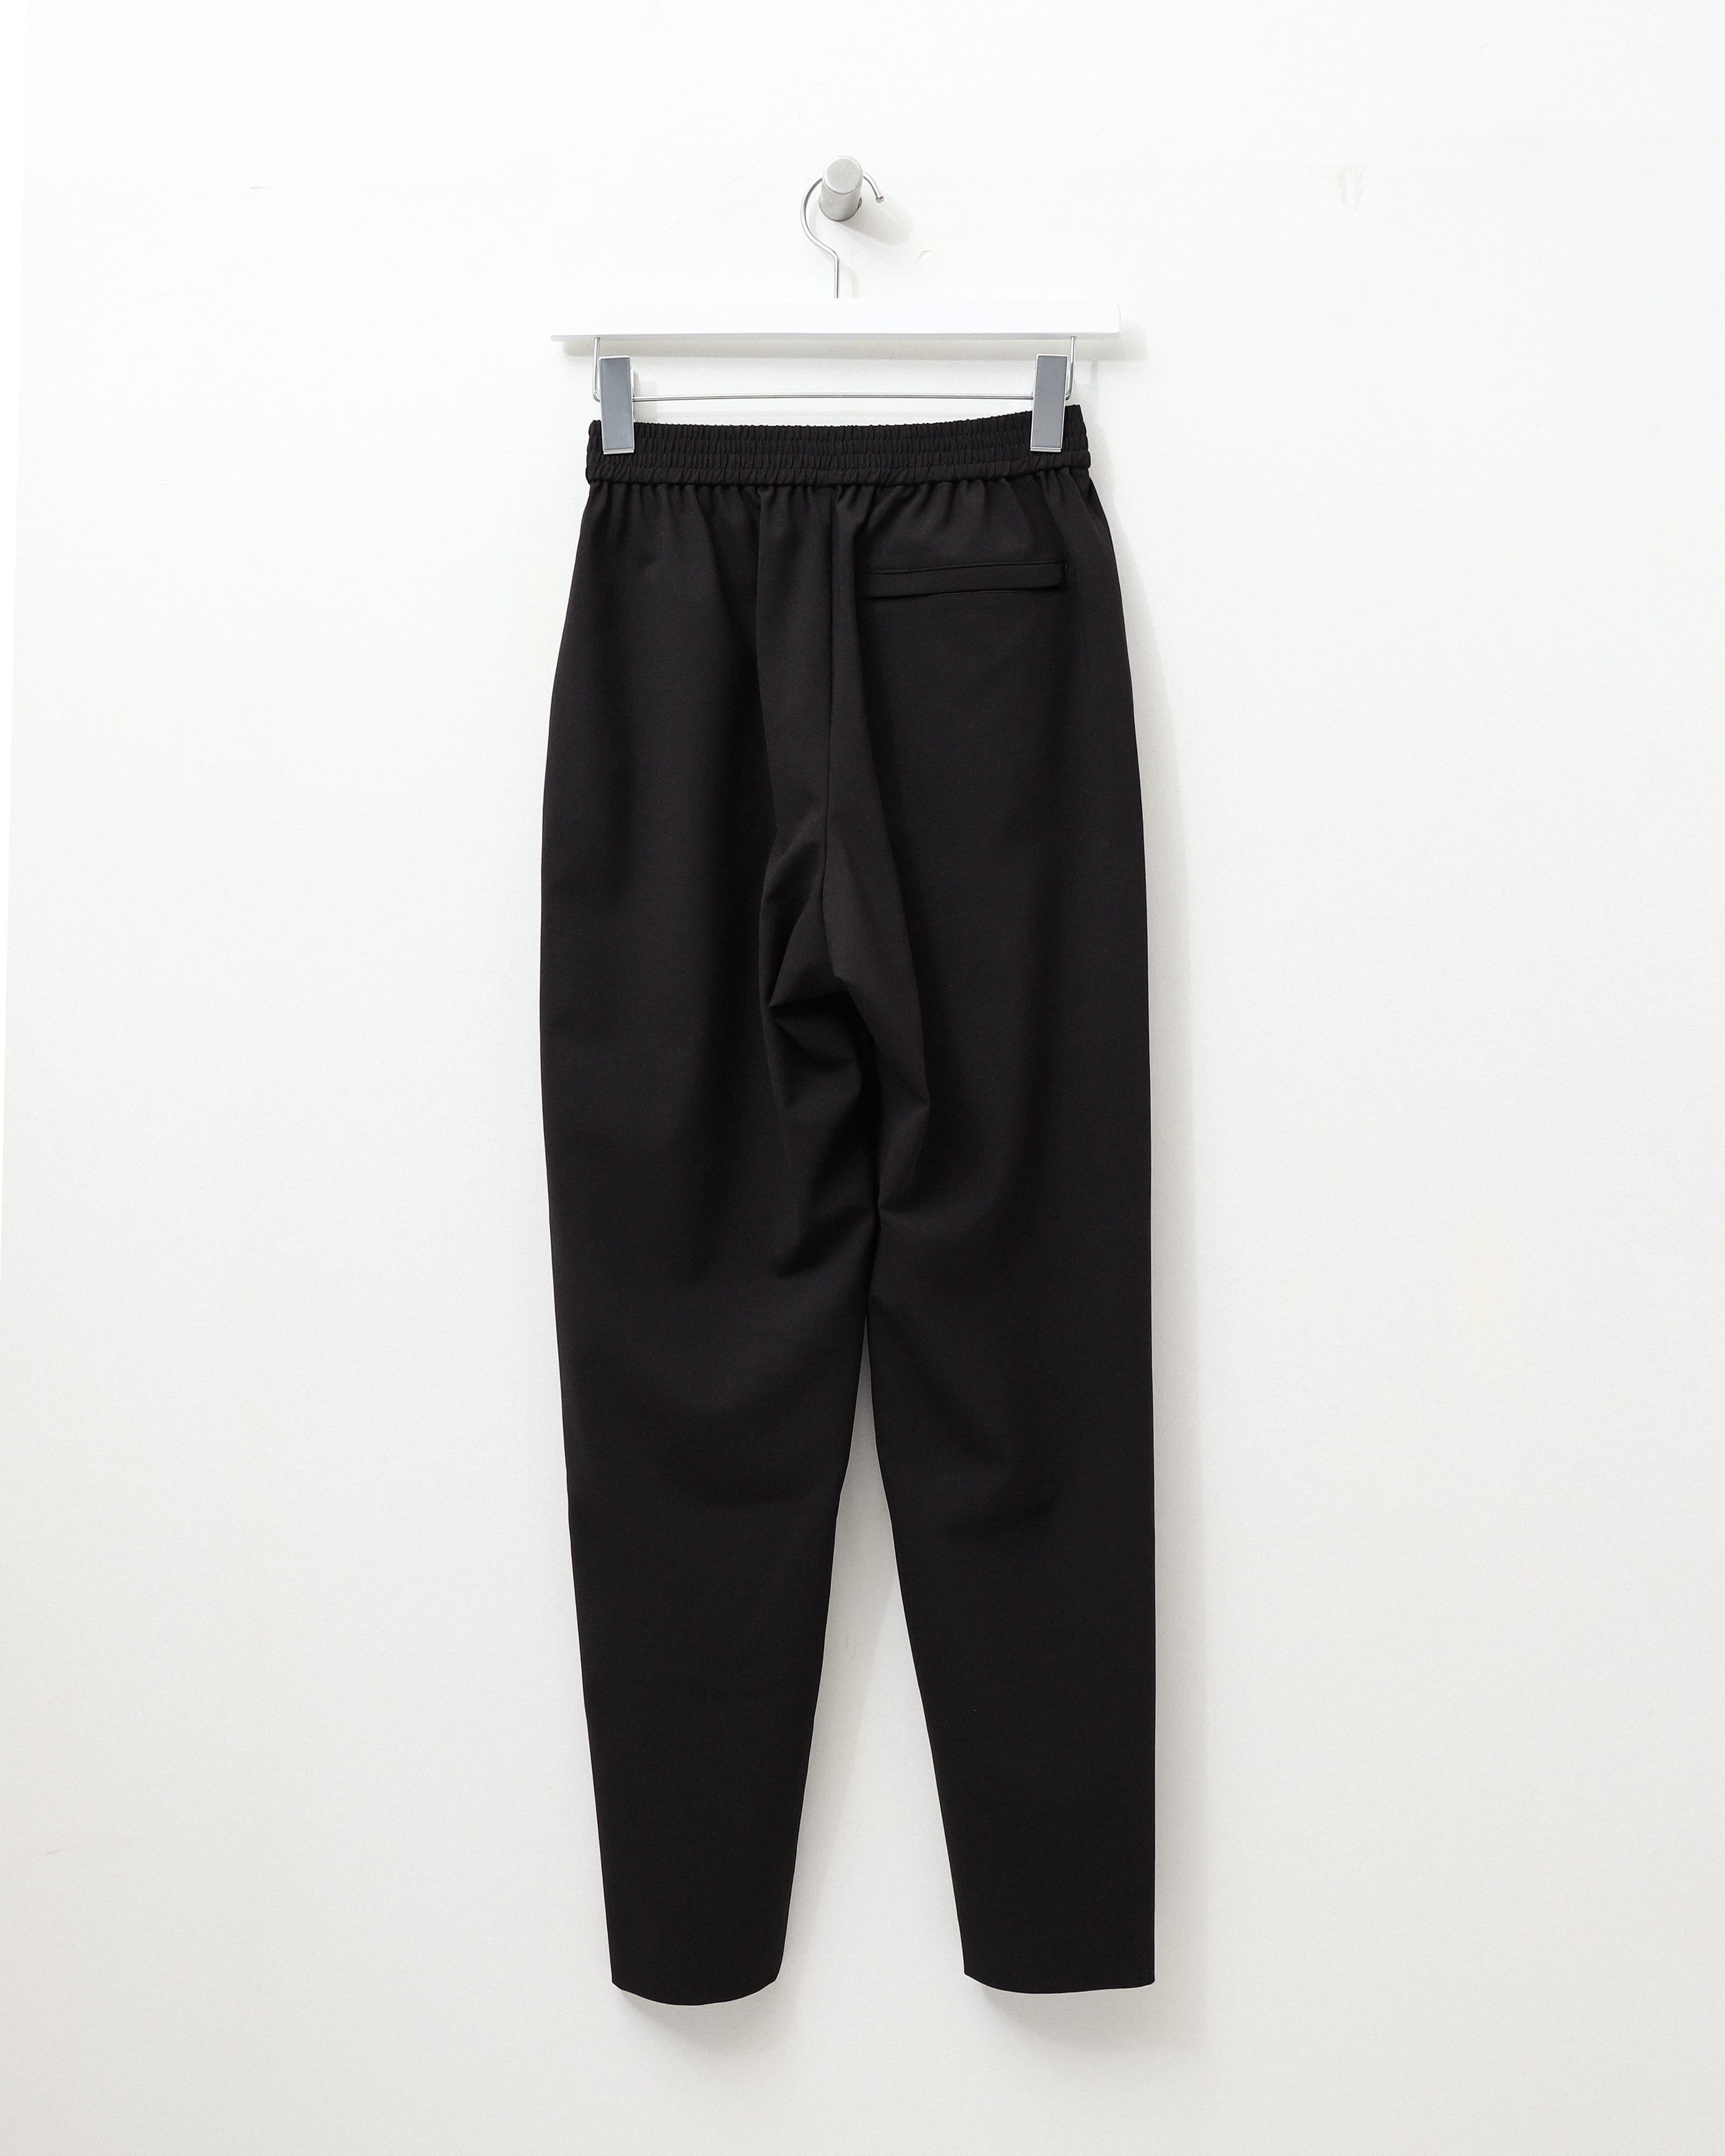 STRETCH TAPERED PANTS 13284 – TIME AFTER TIME